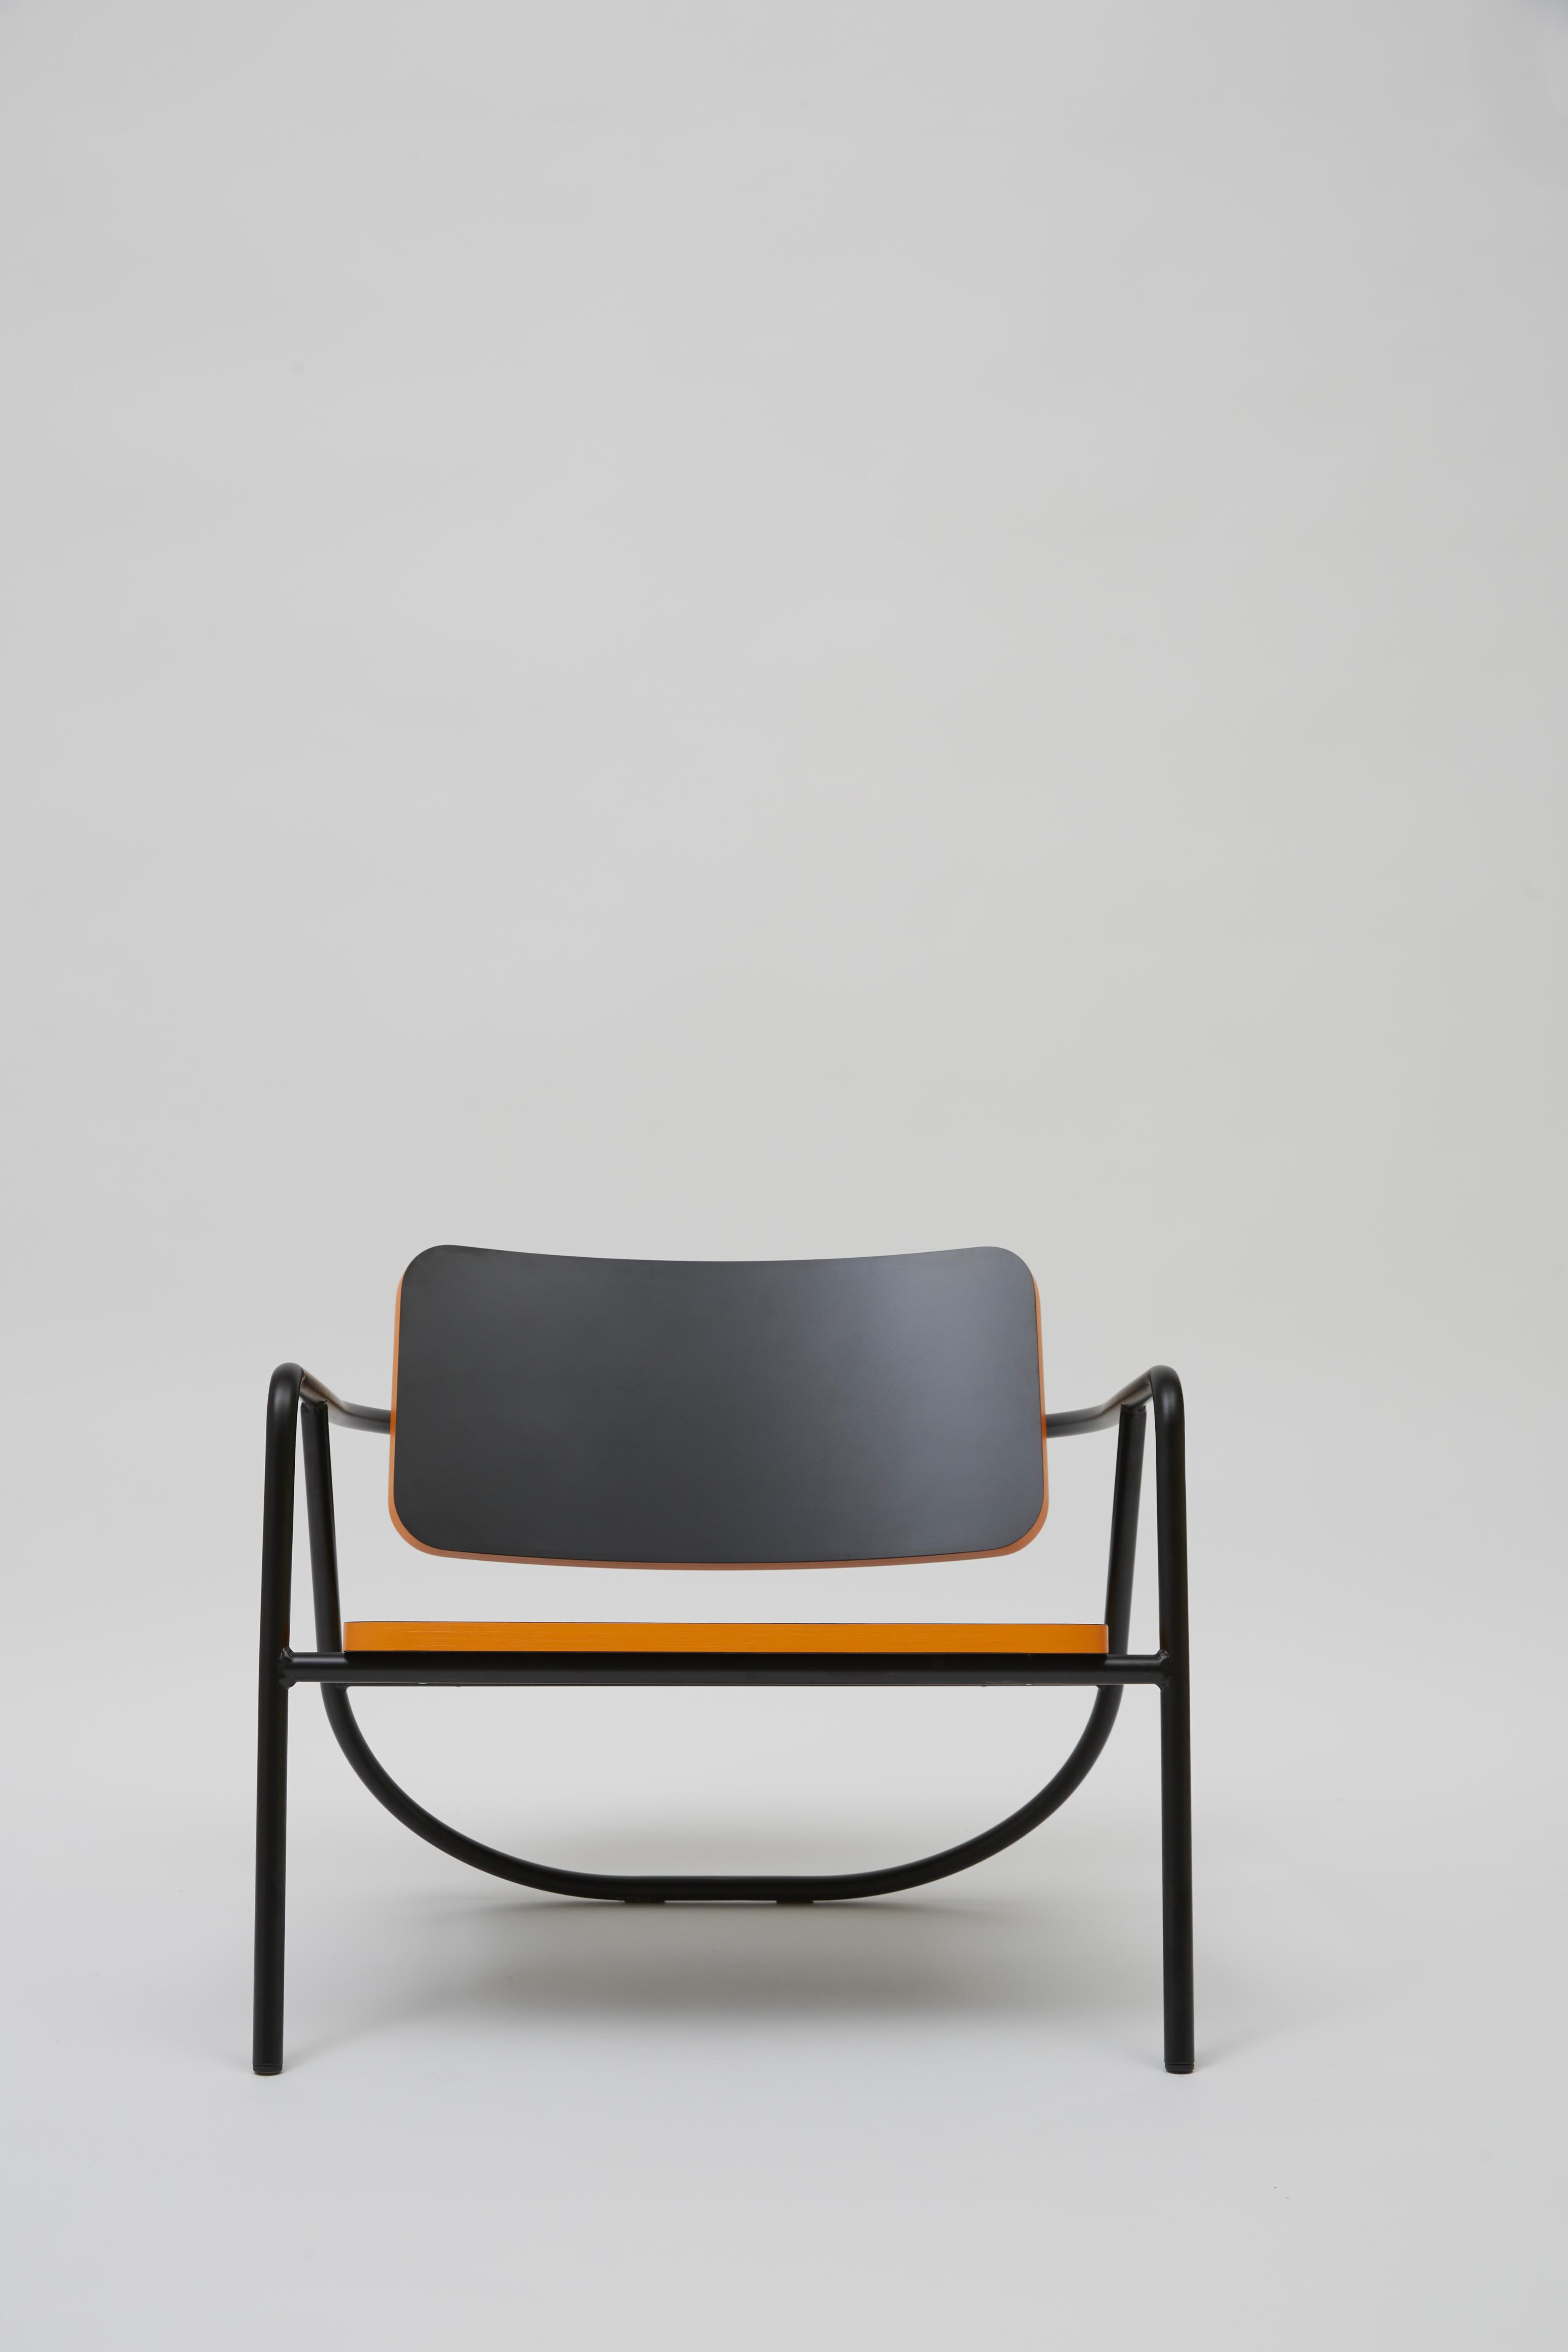 Brutal and minimalist both in its design and the choice of materials. This is La Misciù easy chair, made up of a bent steel structure and a birch plywood top.